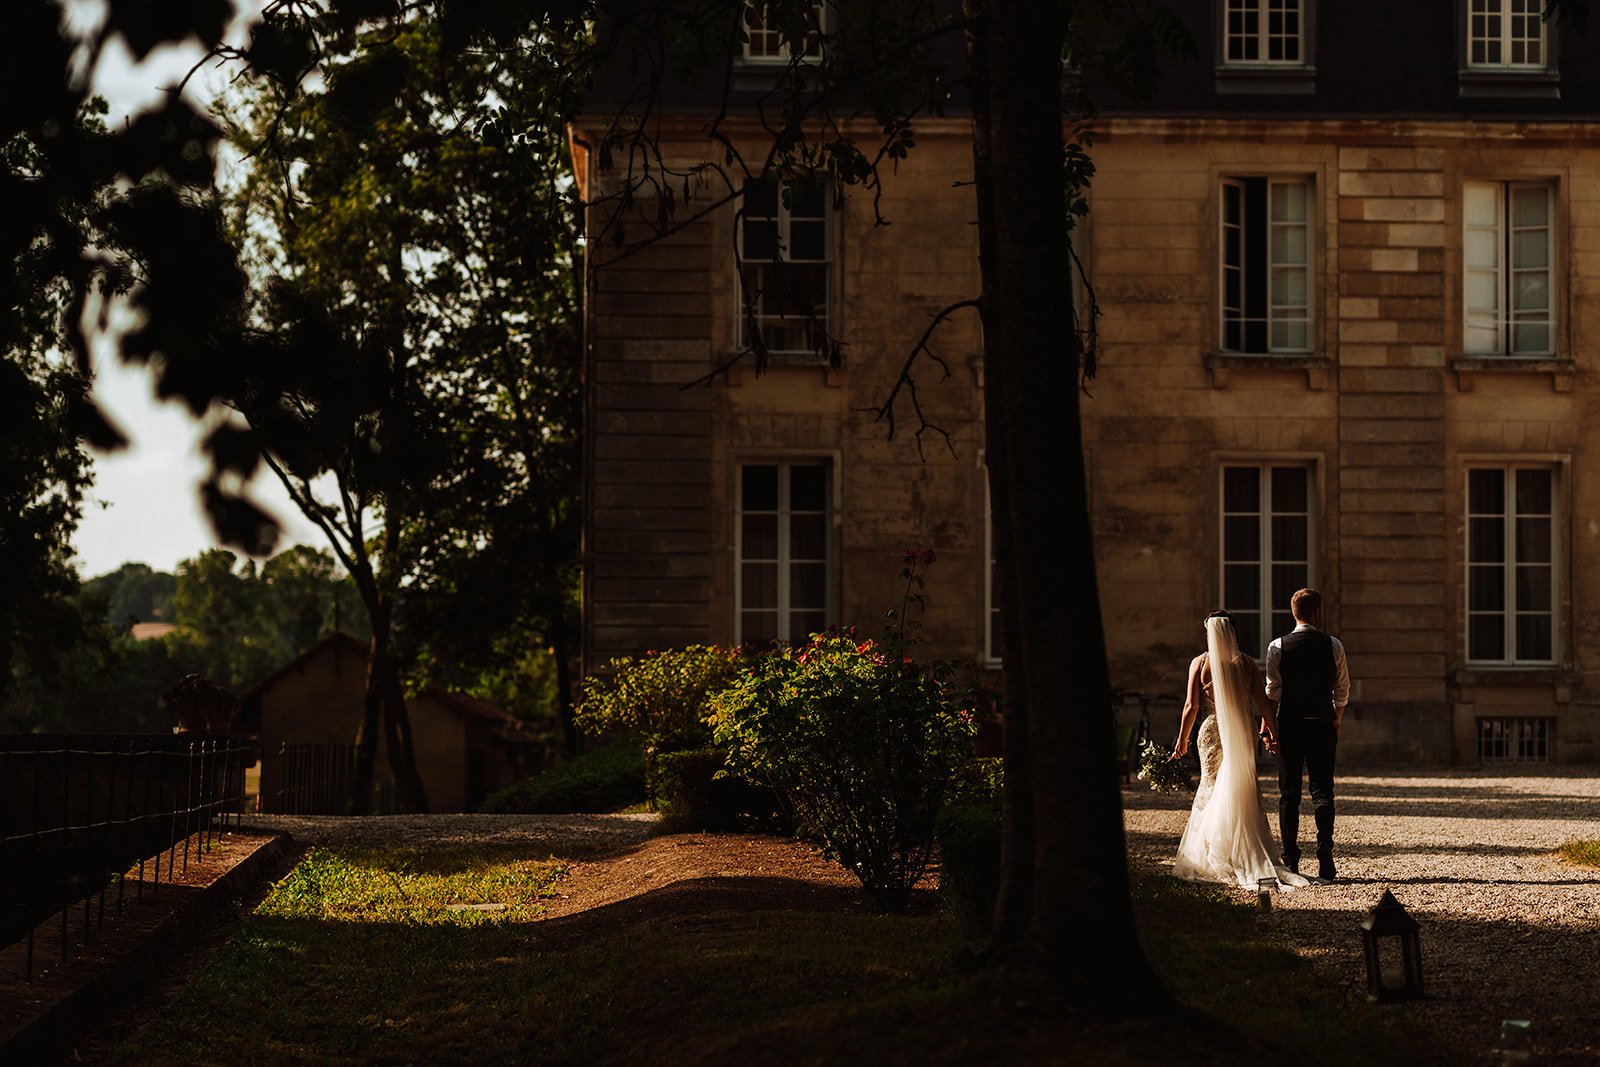 A bride and groom at twilight  in front of Chateau de Courtomer near Paris .